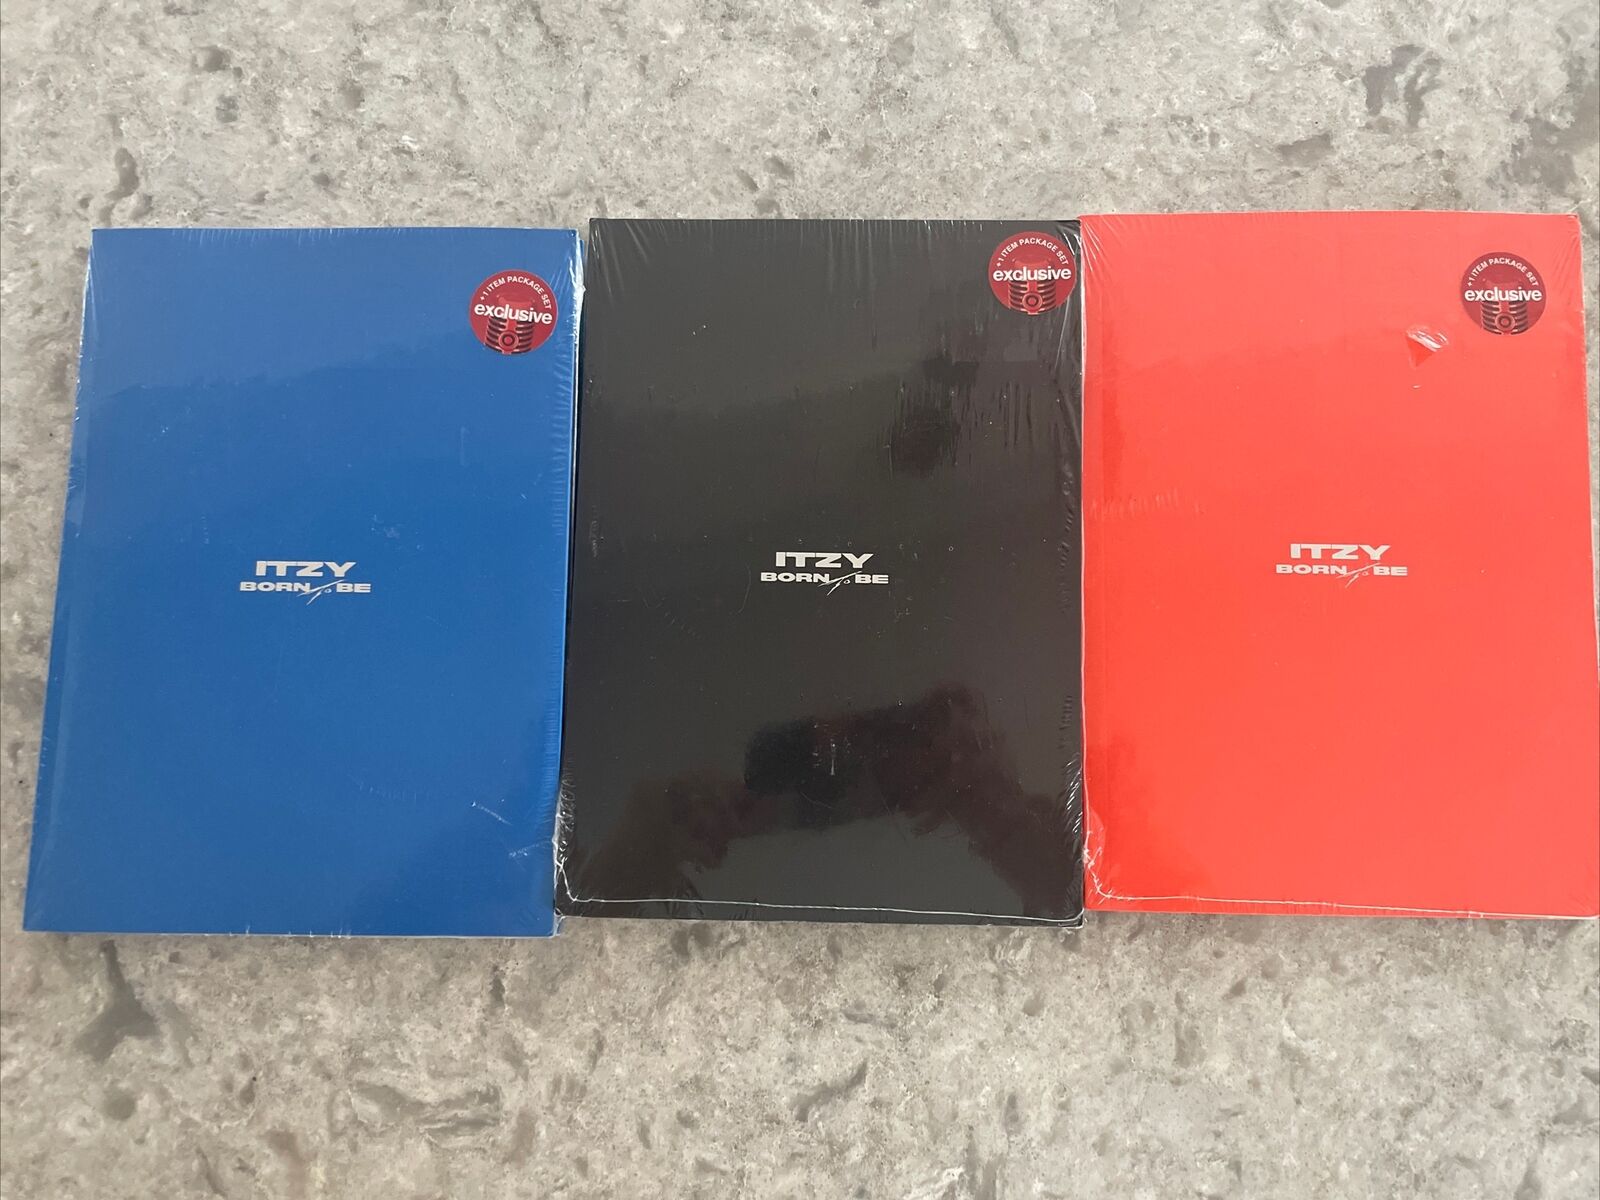 SEALED ITZY 2nd Album [BORN TO BE] TARGET EXCLUSIVE SET Red Blue Black